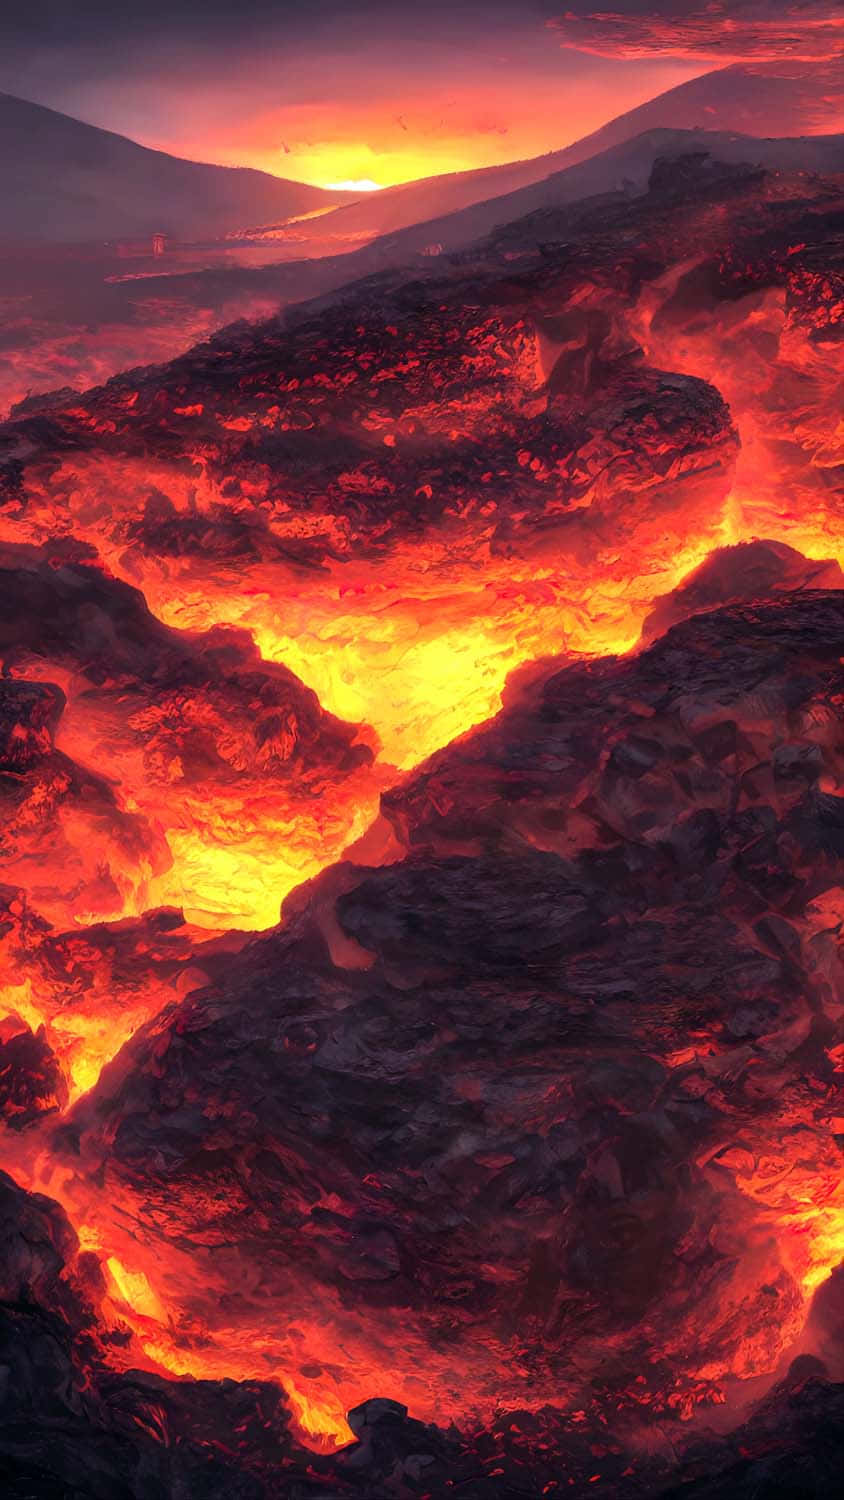 Intense heat emanating from a volcano in the form of molten lava